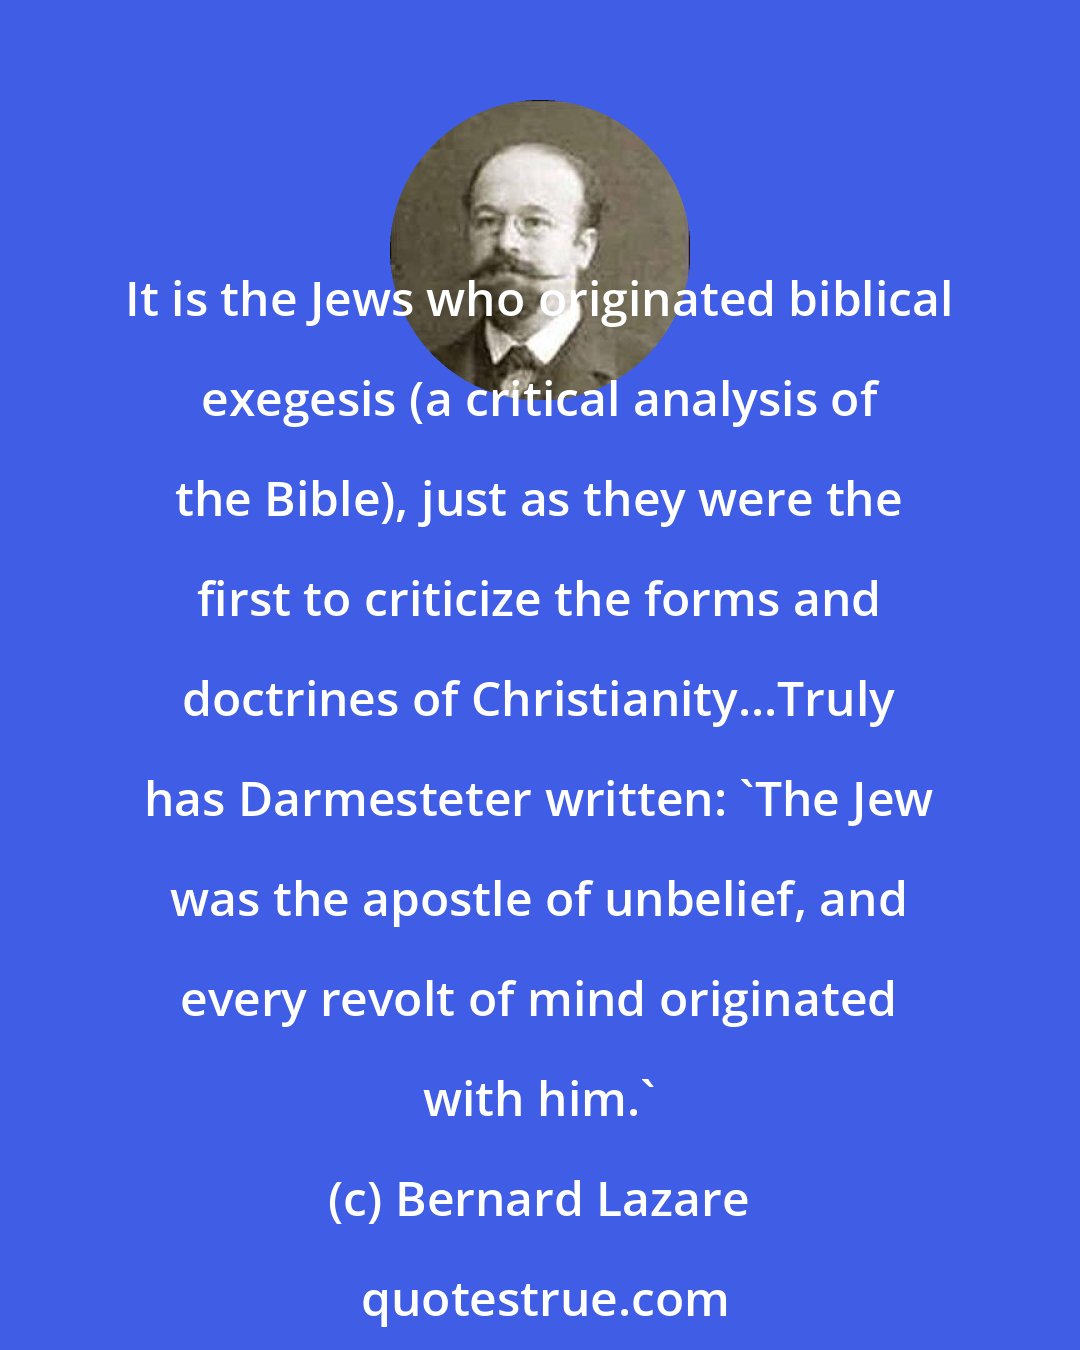 Bernard Lazare: It is the Jews who originated biblical exegesis (a critical analysis of the Bible), just as they were the first to criticize the forms and doctrines of Christianity...Truly has Darmesteter written: 'The Jew was the apostle of unbelief, and every revolt of mind originated with him.'